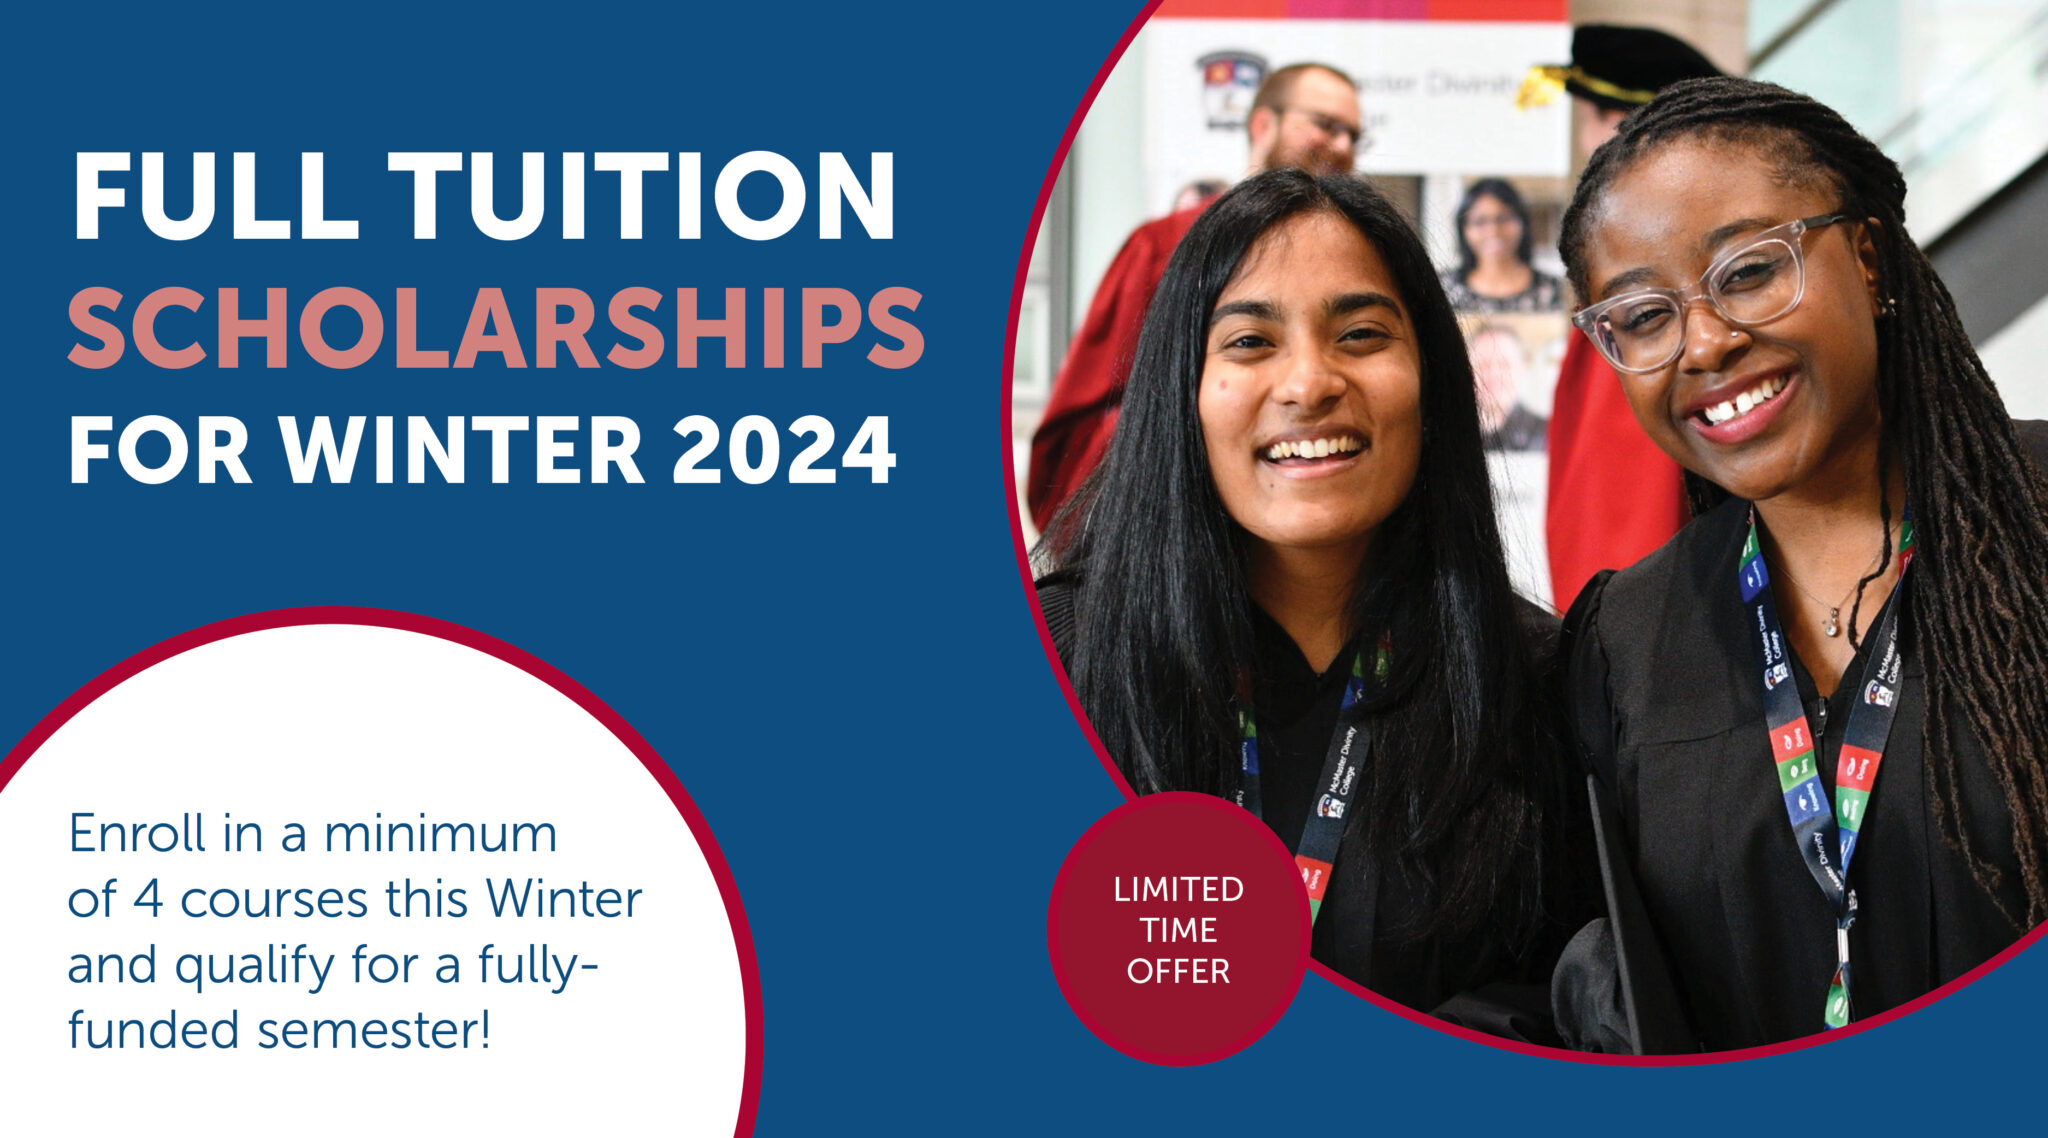 Winter 2024 Funding Offer McMaster Divinity College